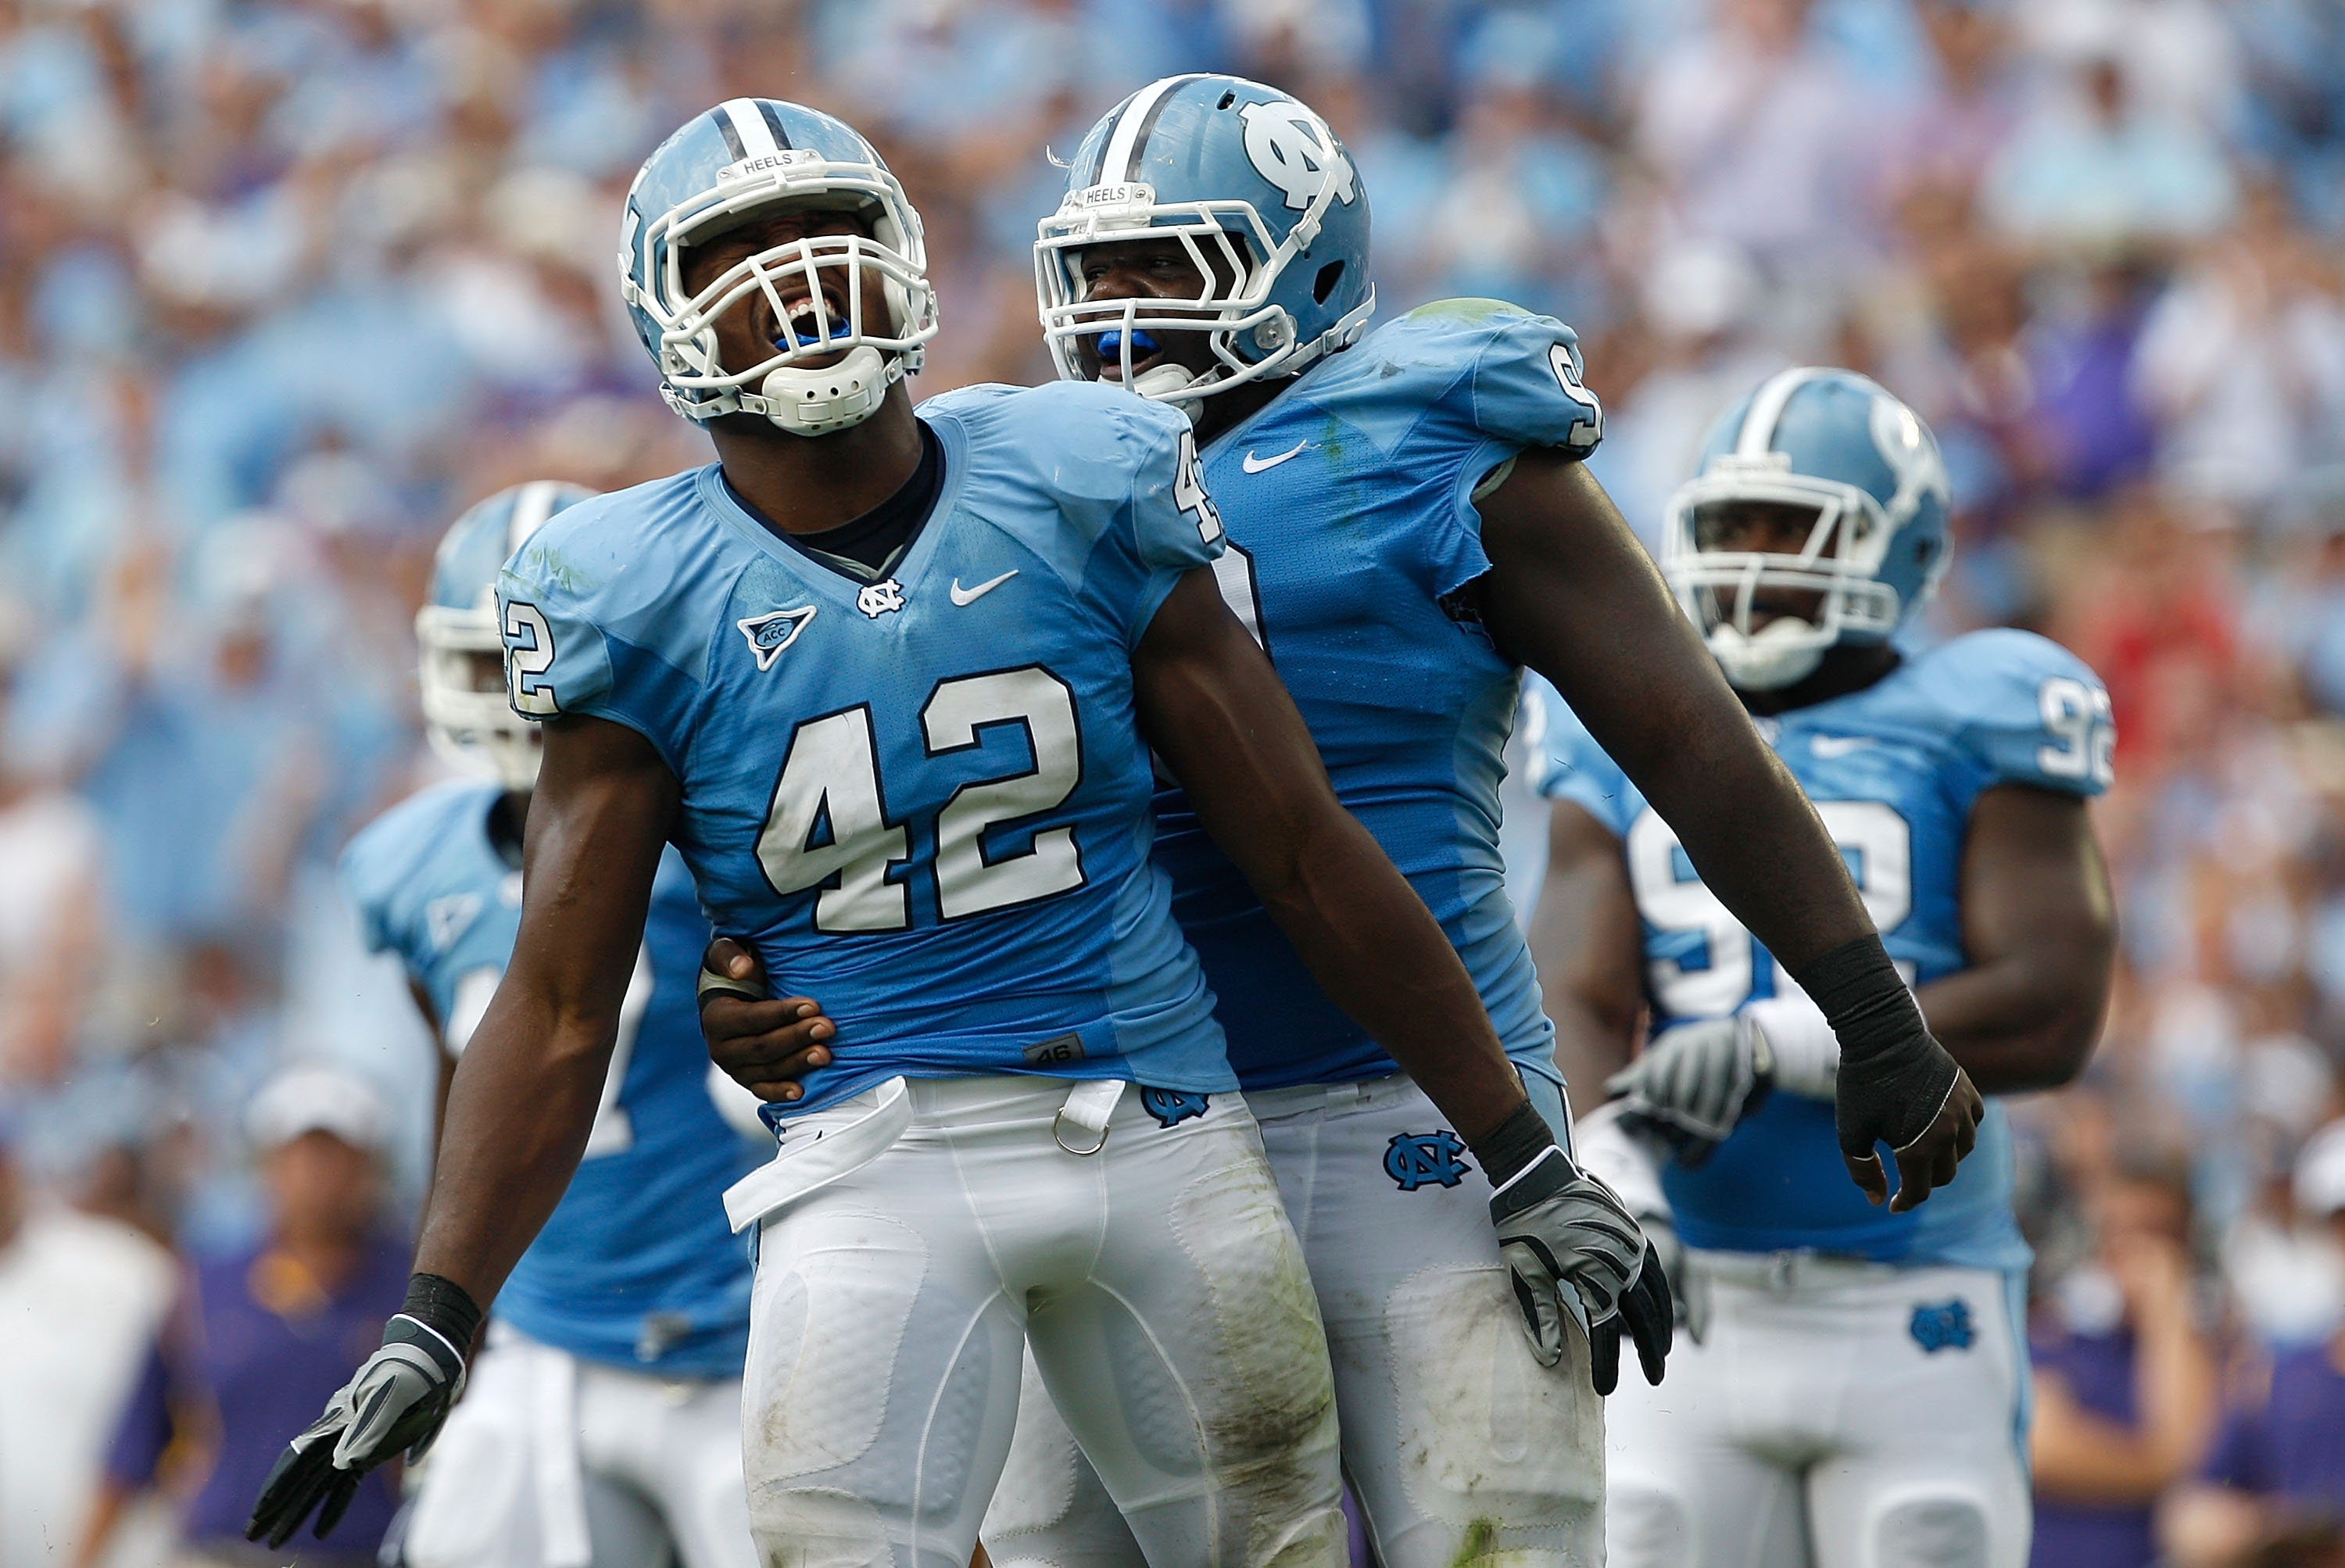 CHAPEL HILL, NC - SEPTEMBER 19:  Robert Quinn #42 of the North Carolina Tar Heels celebrates after a sack with teammate Marvin Austin #9 against the East Carolina Pirates at Kenan Stadium on September 19, 2009 in Chapel Hill, North Carolina.  (Photo by St